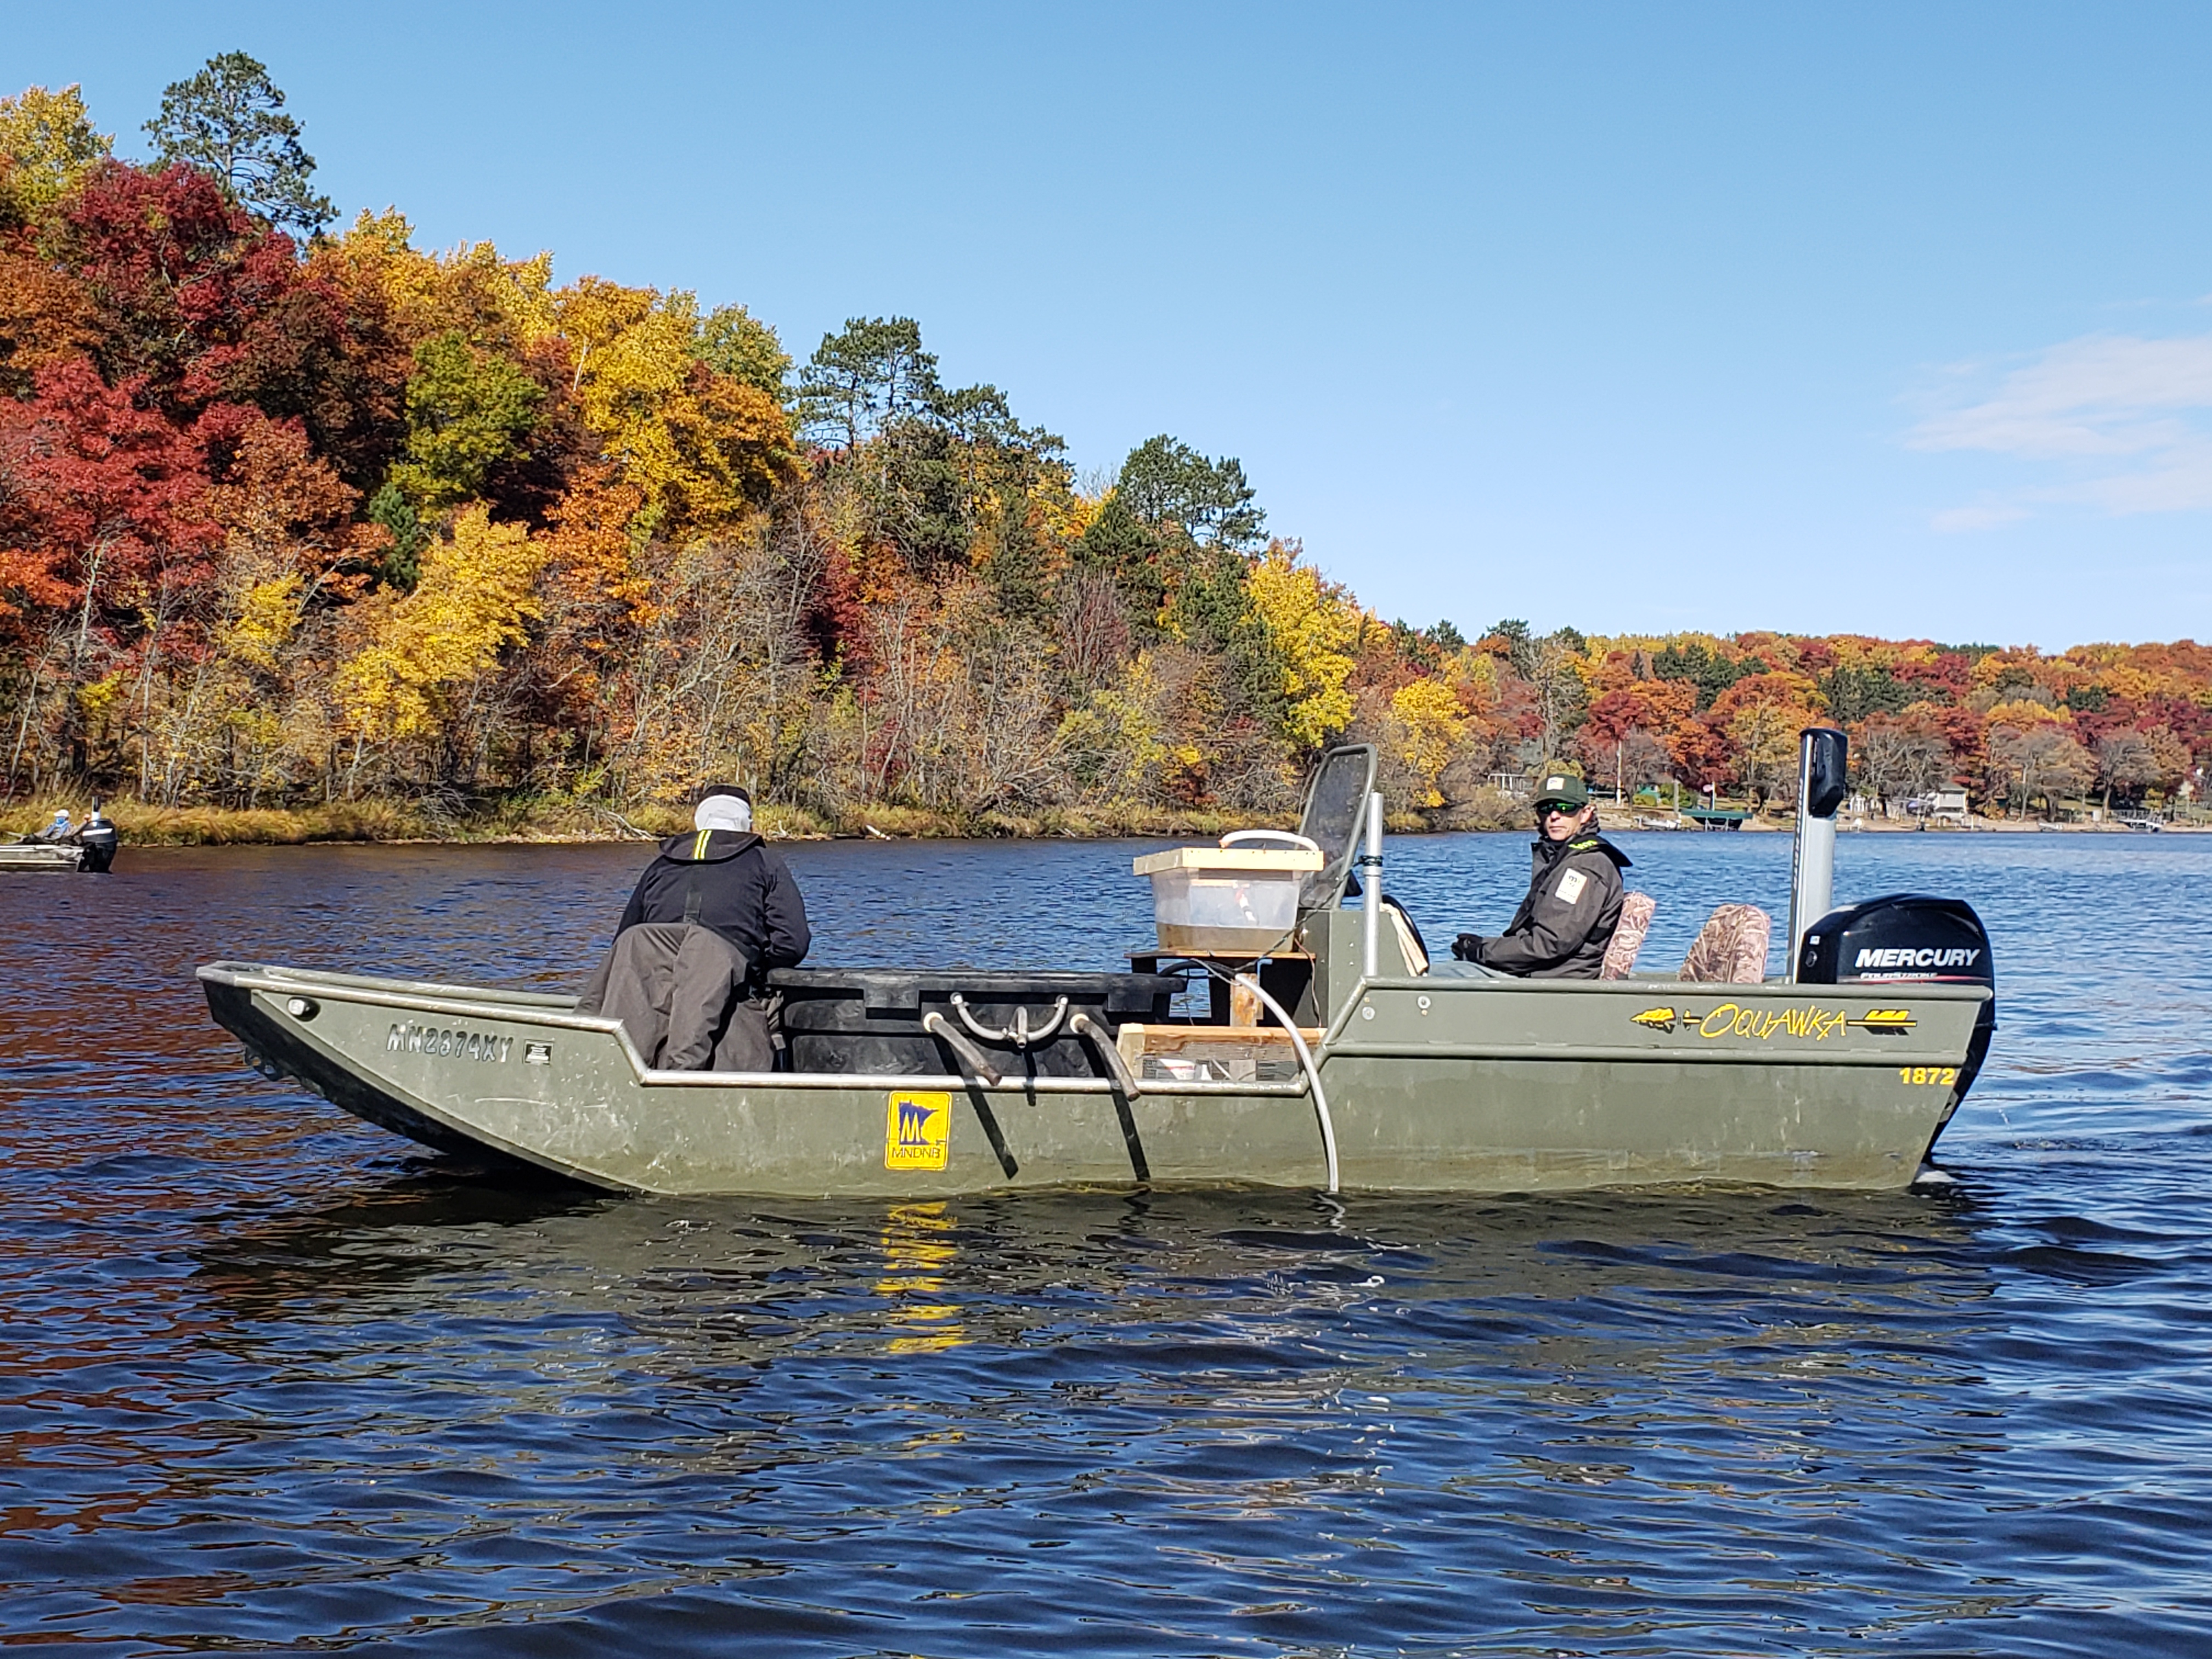 Two people on a boat on the water with colorful fall trees in the background